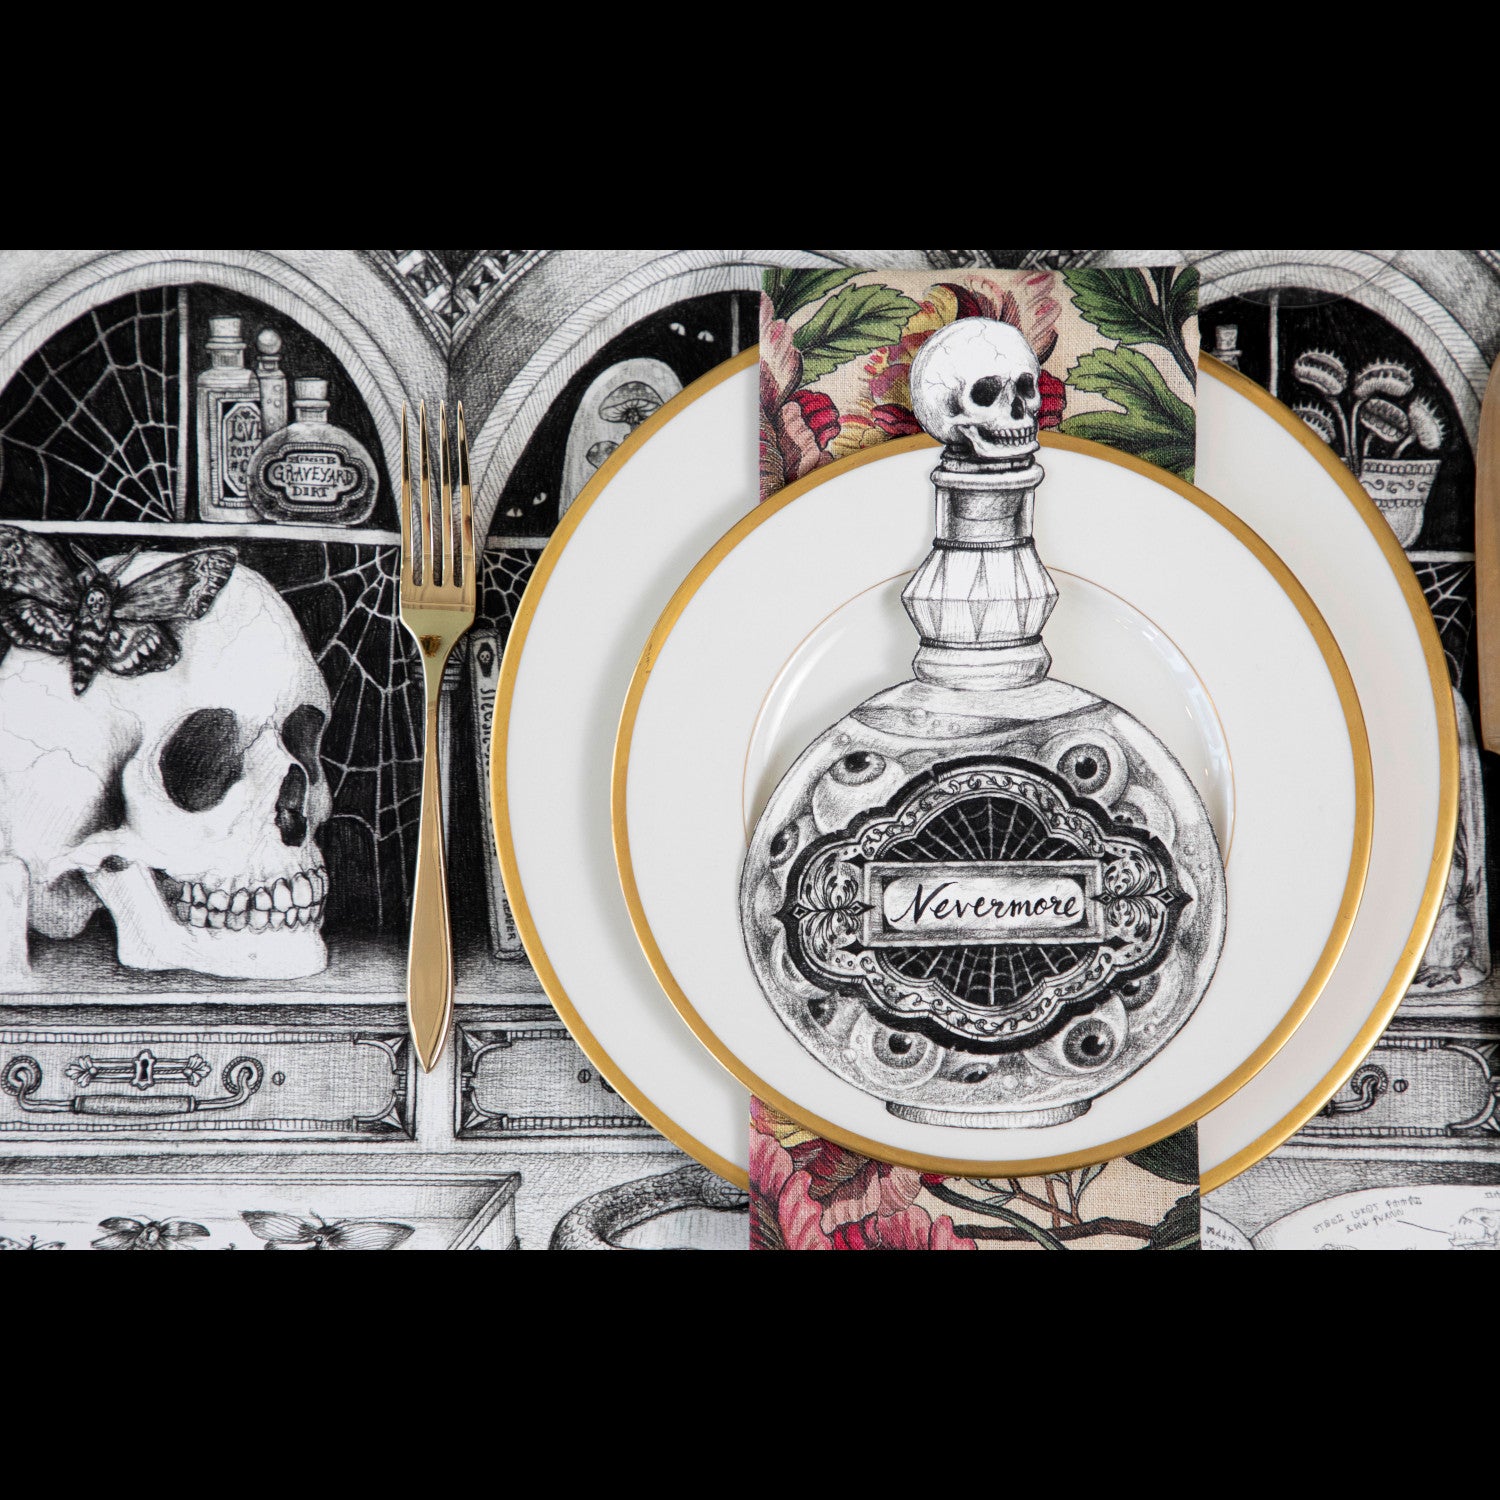 A spooky Halloween table setting featuring a eerie skull and an ominous &quot;Hester &amp; Cook Poison Bottle Table Accent&quot; as a chilling table accent.